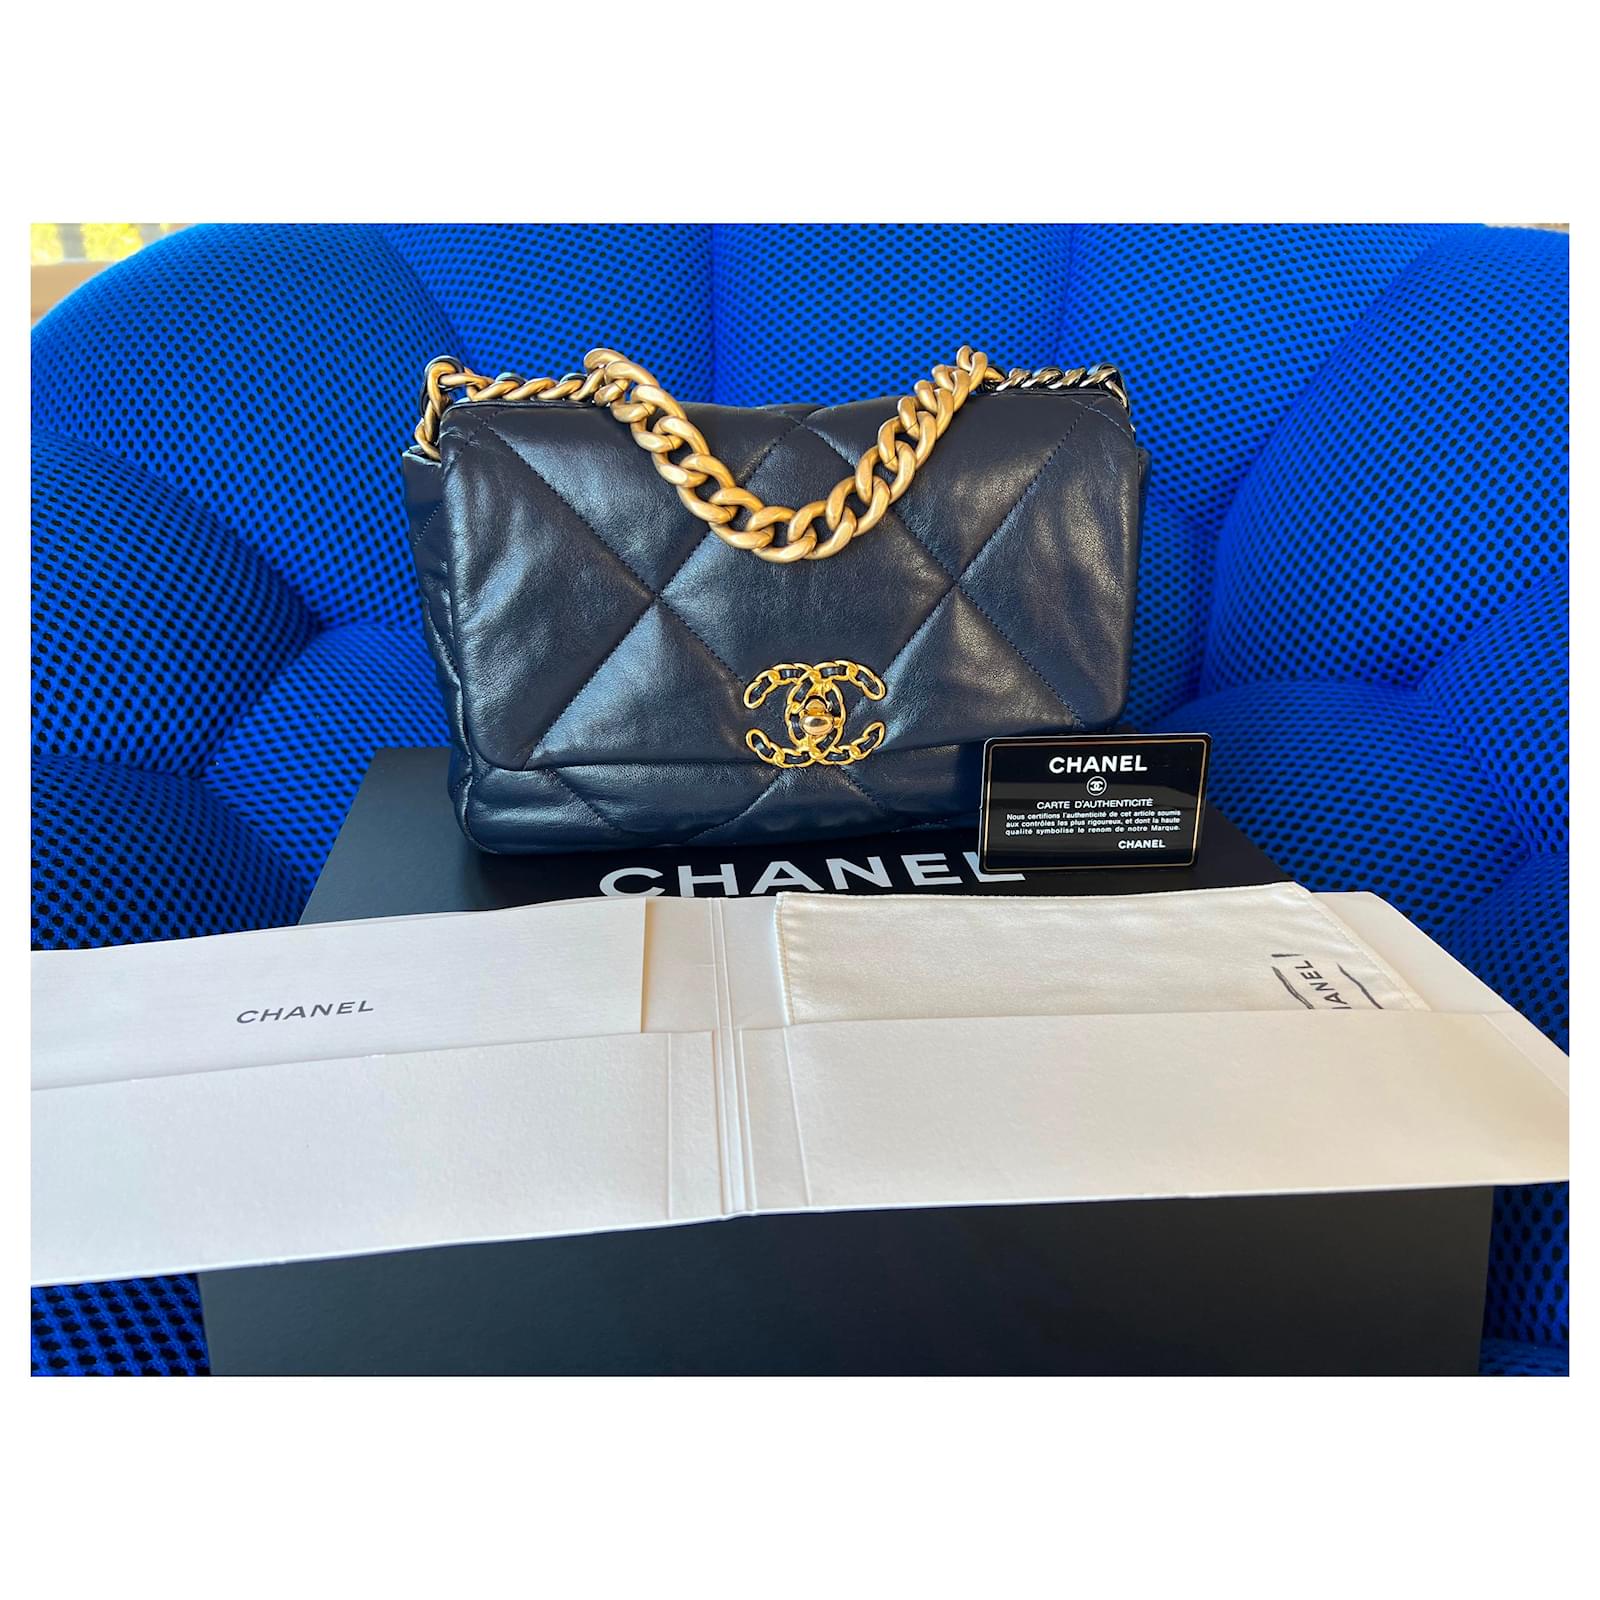 Chanel 19 Bag, Rare and sold out color : Navy